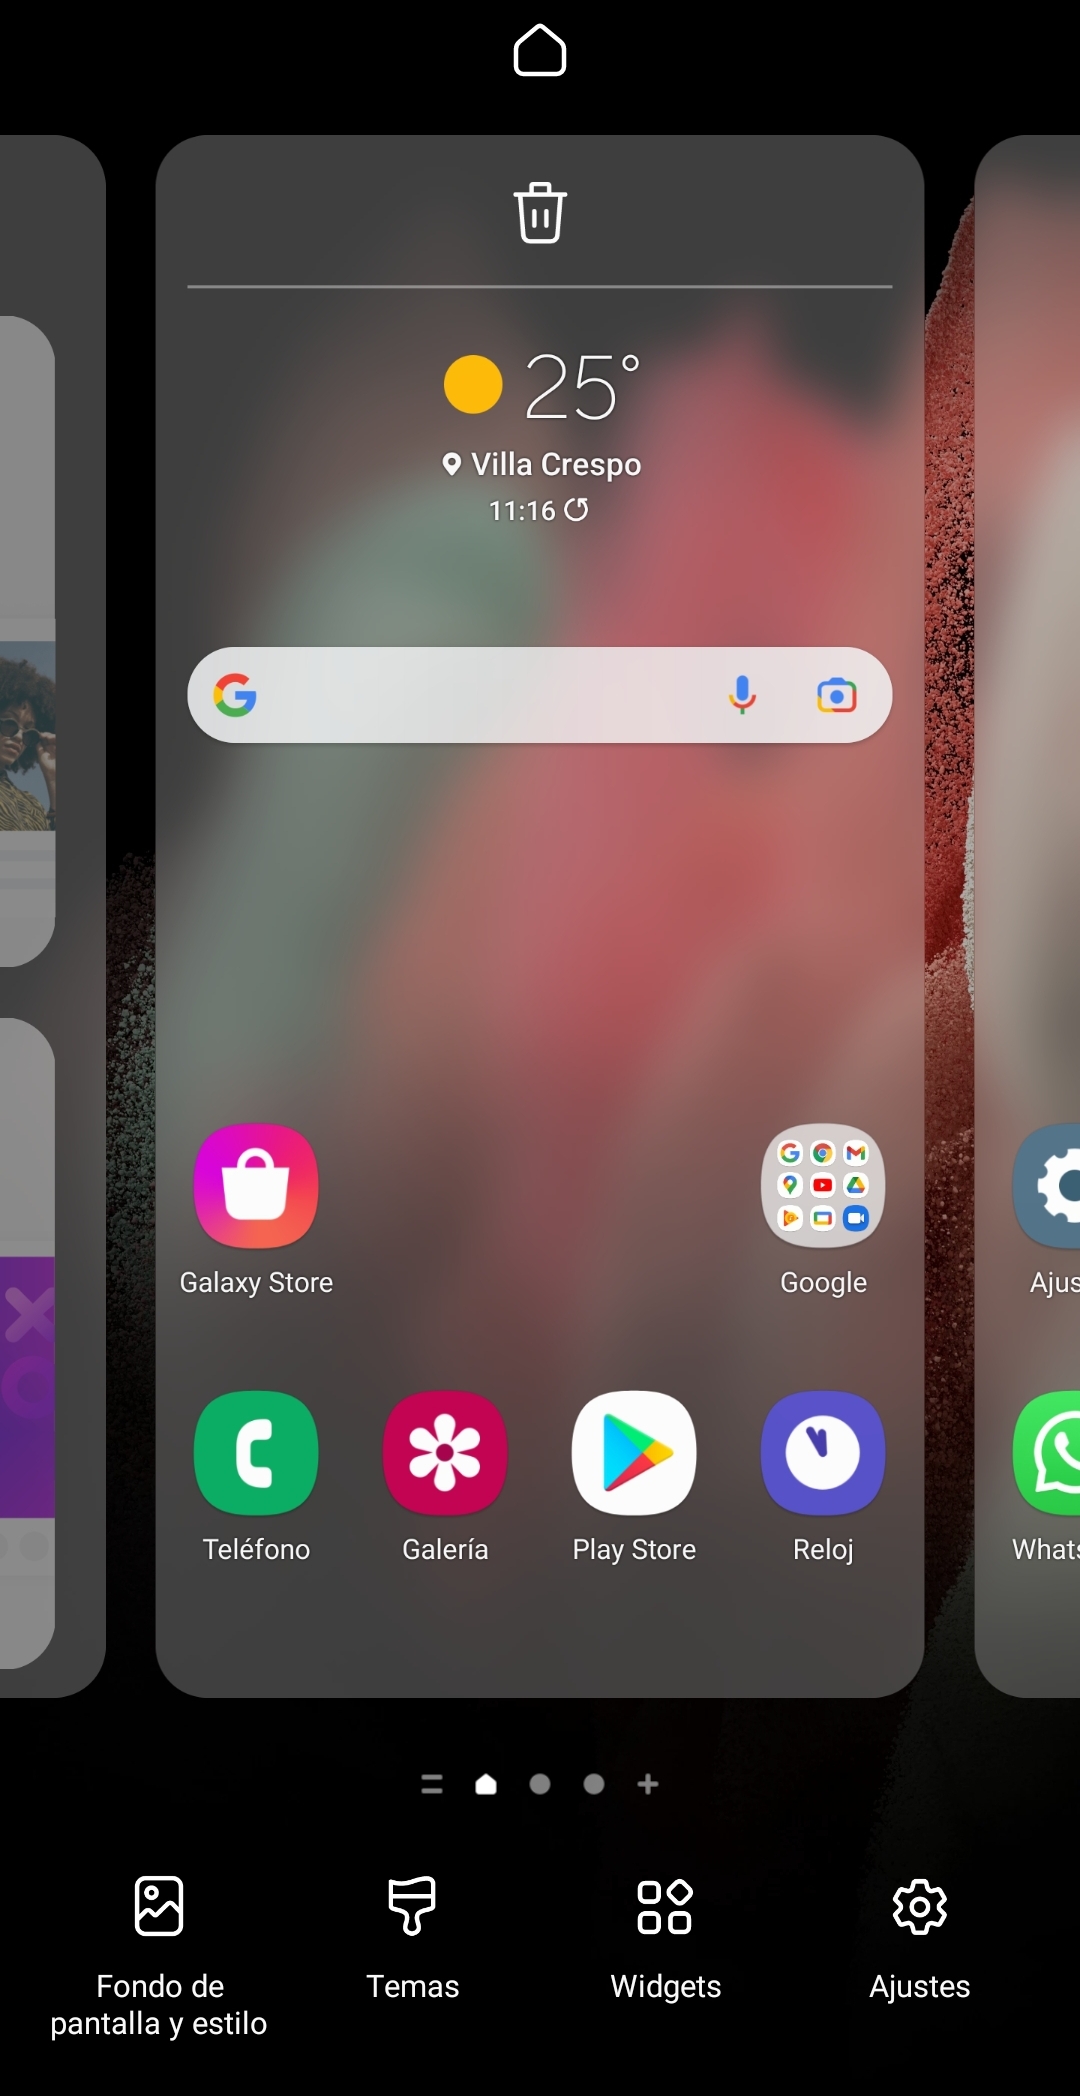 Tapping on the home screen wallpaper brings up the widgets